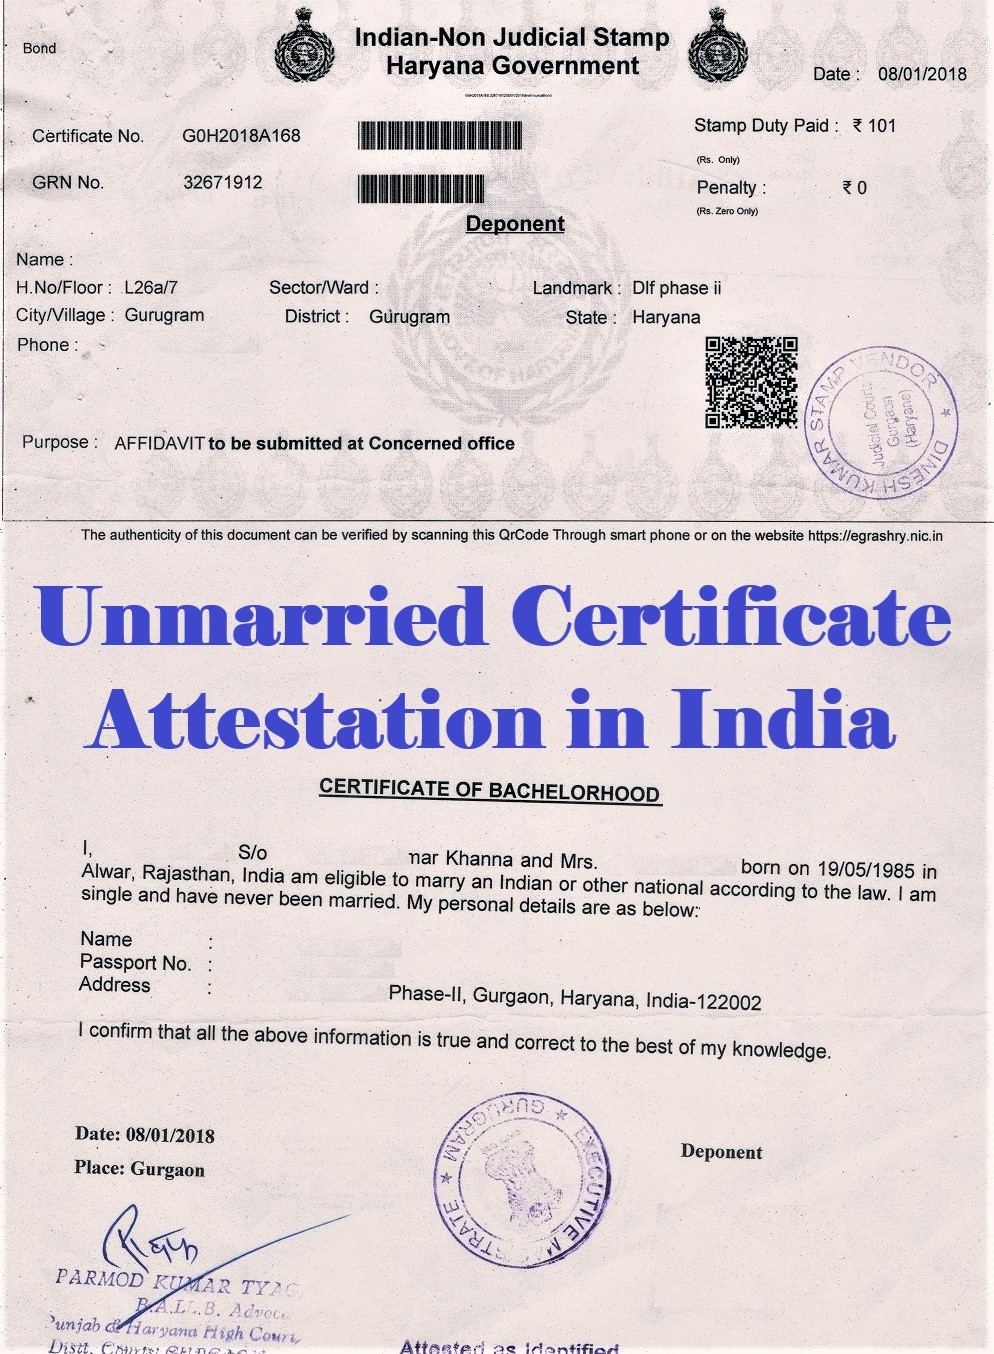 Unmarried Certificate Attestation from Iraq Embassy